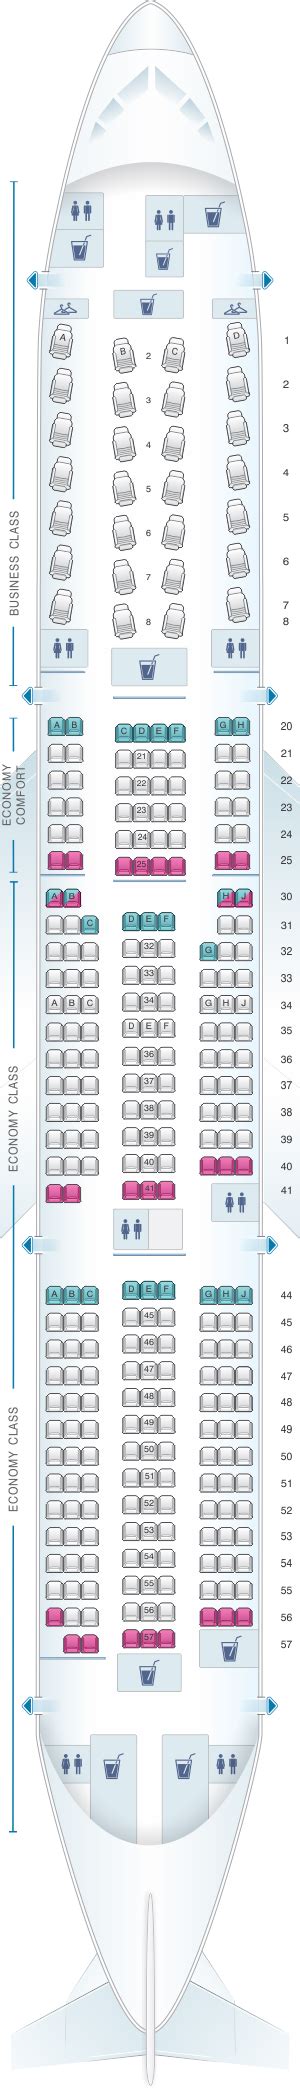 Delta Boeing 777 200 Seating Chart Elcho Table